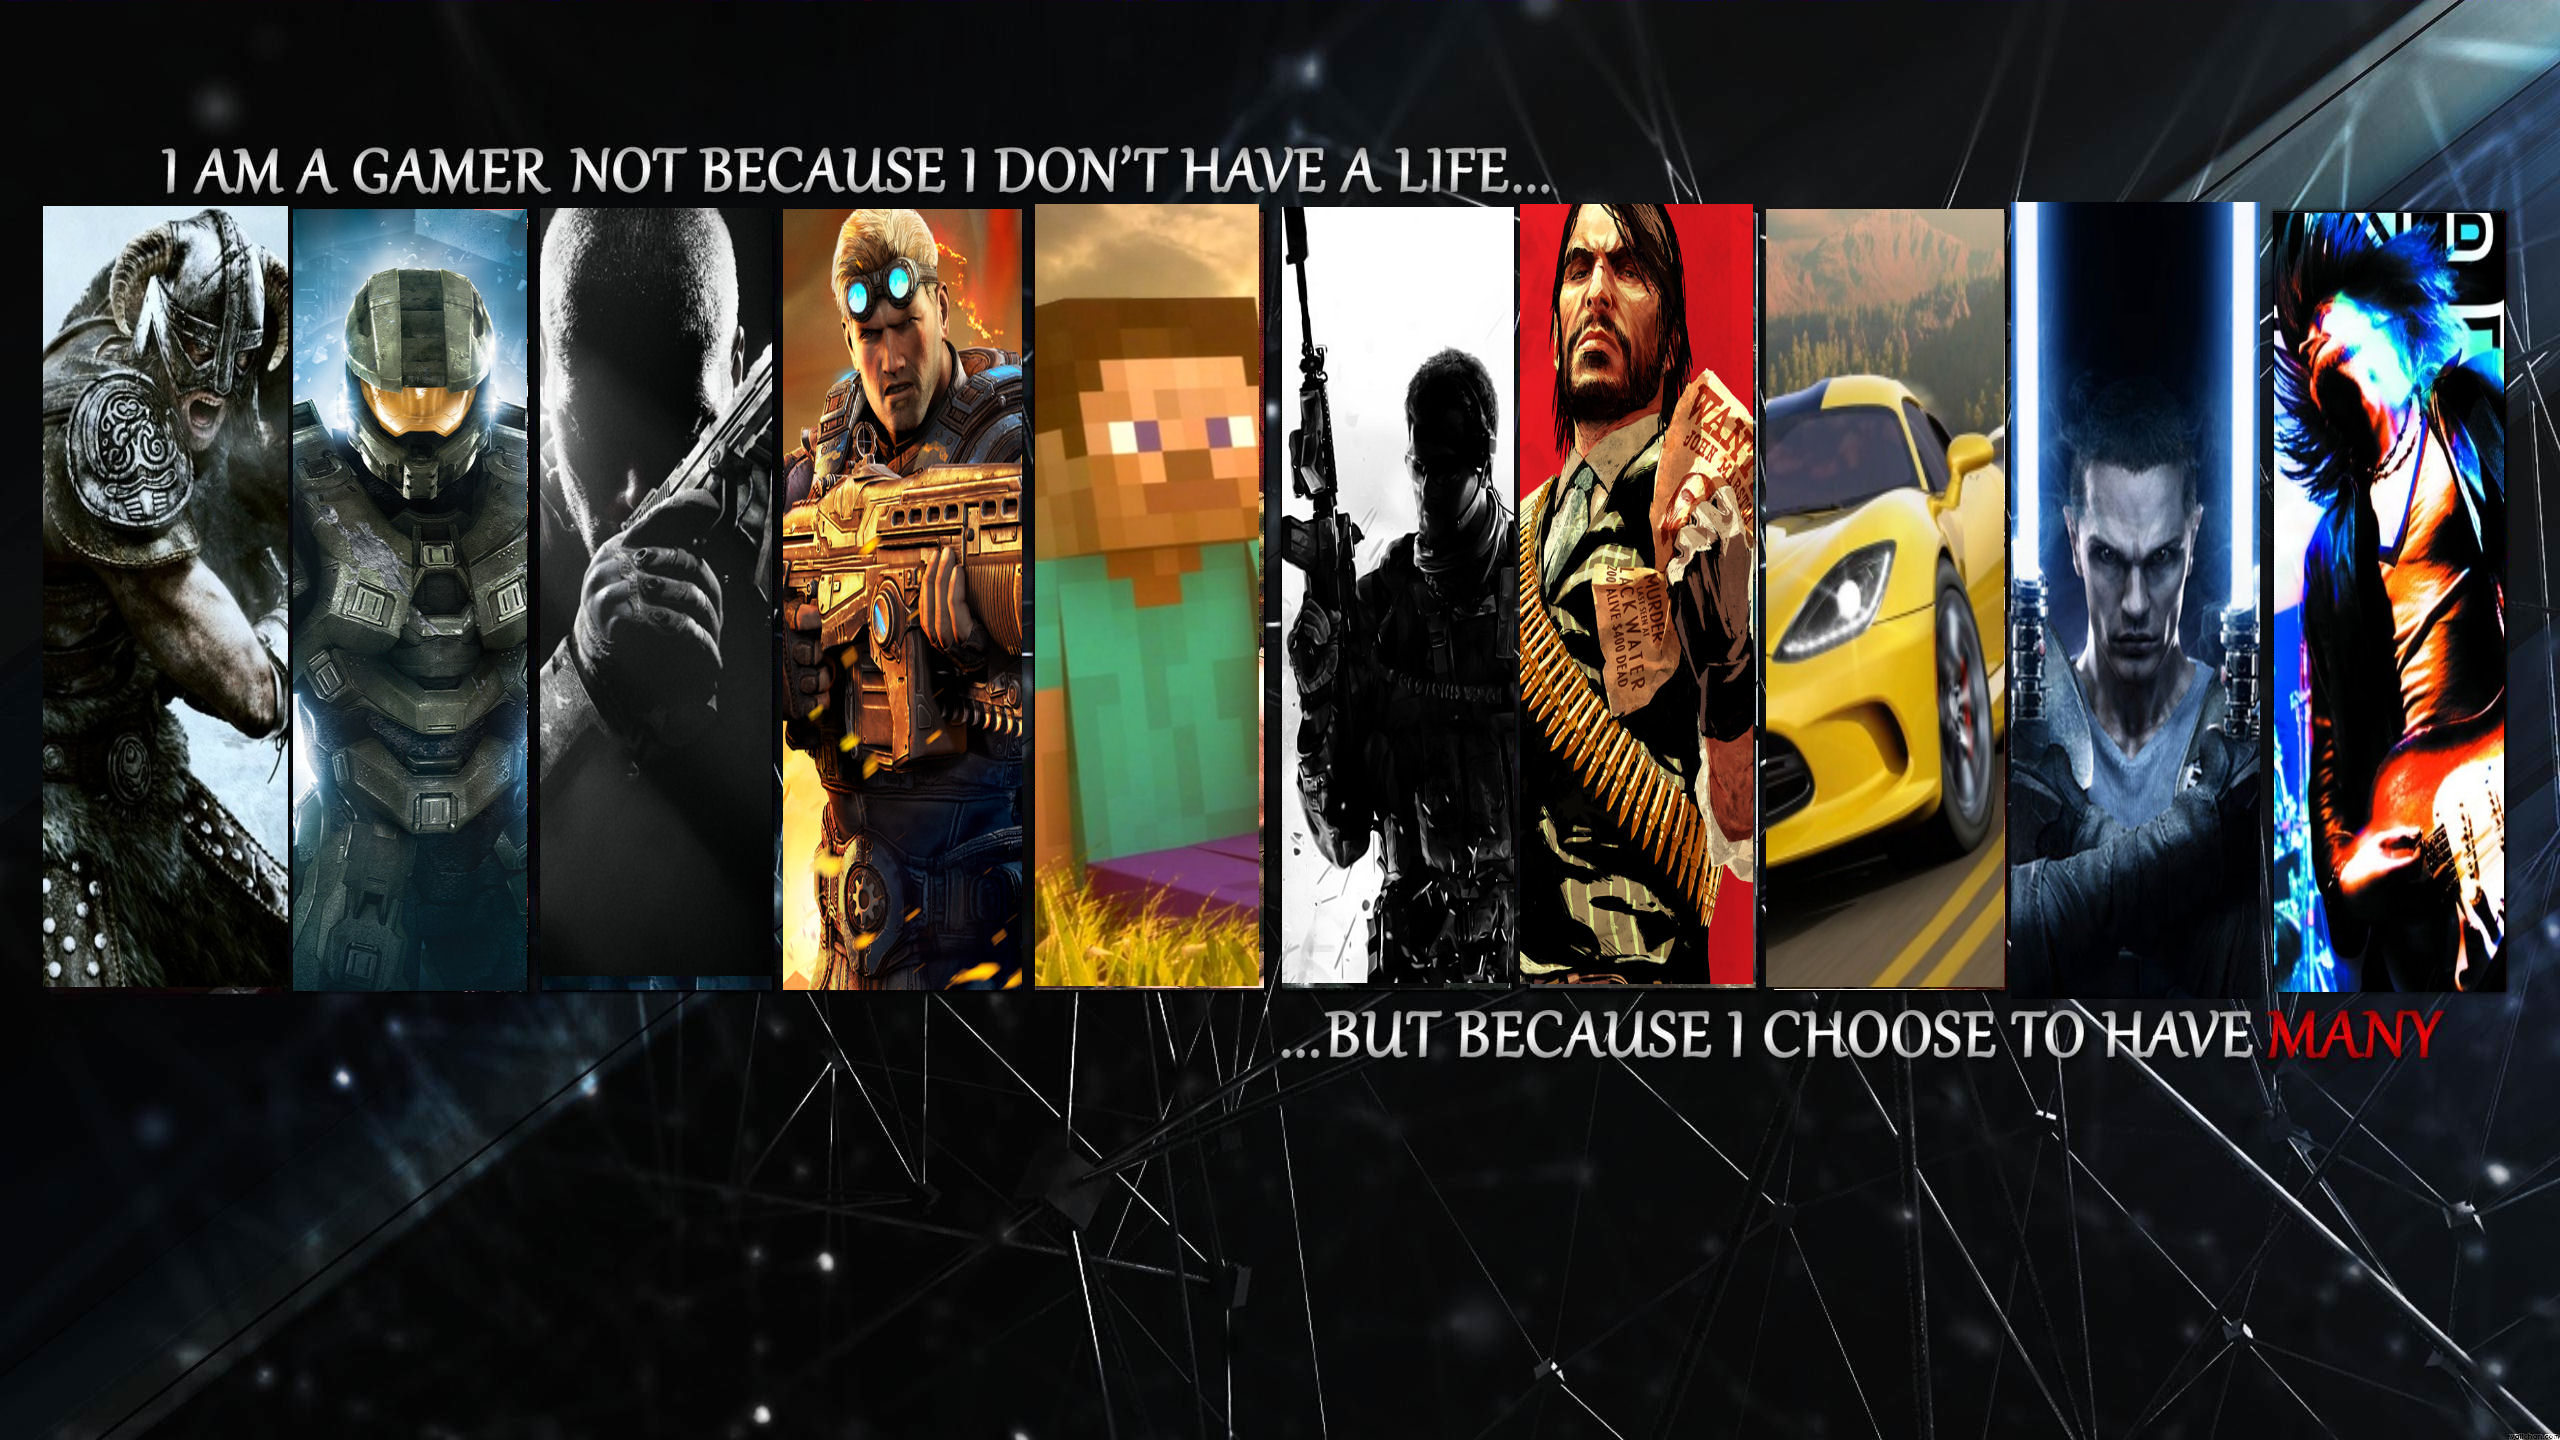 redid a gaming wallpaper i saw but with different games gaming